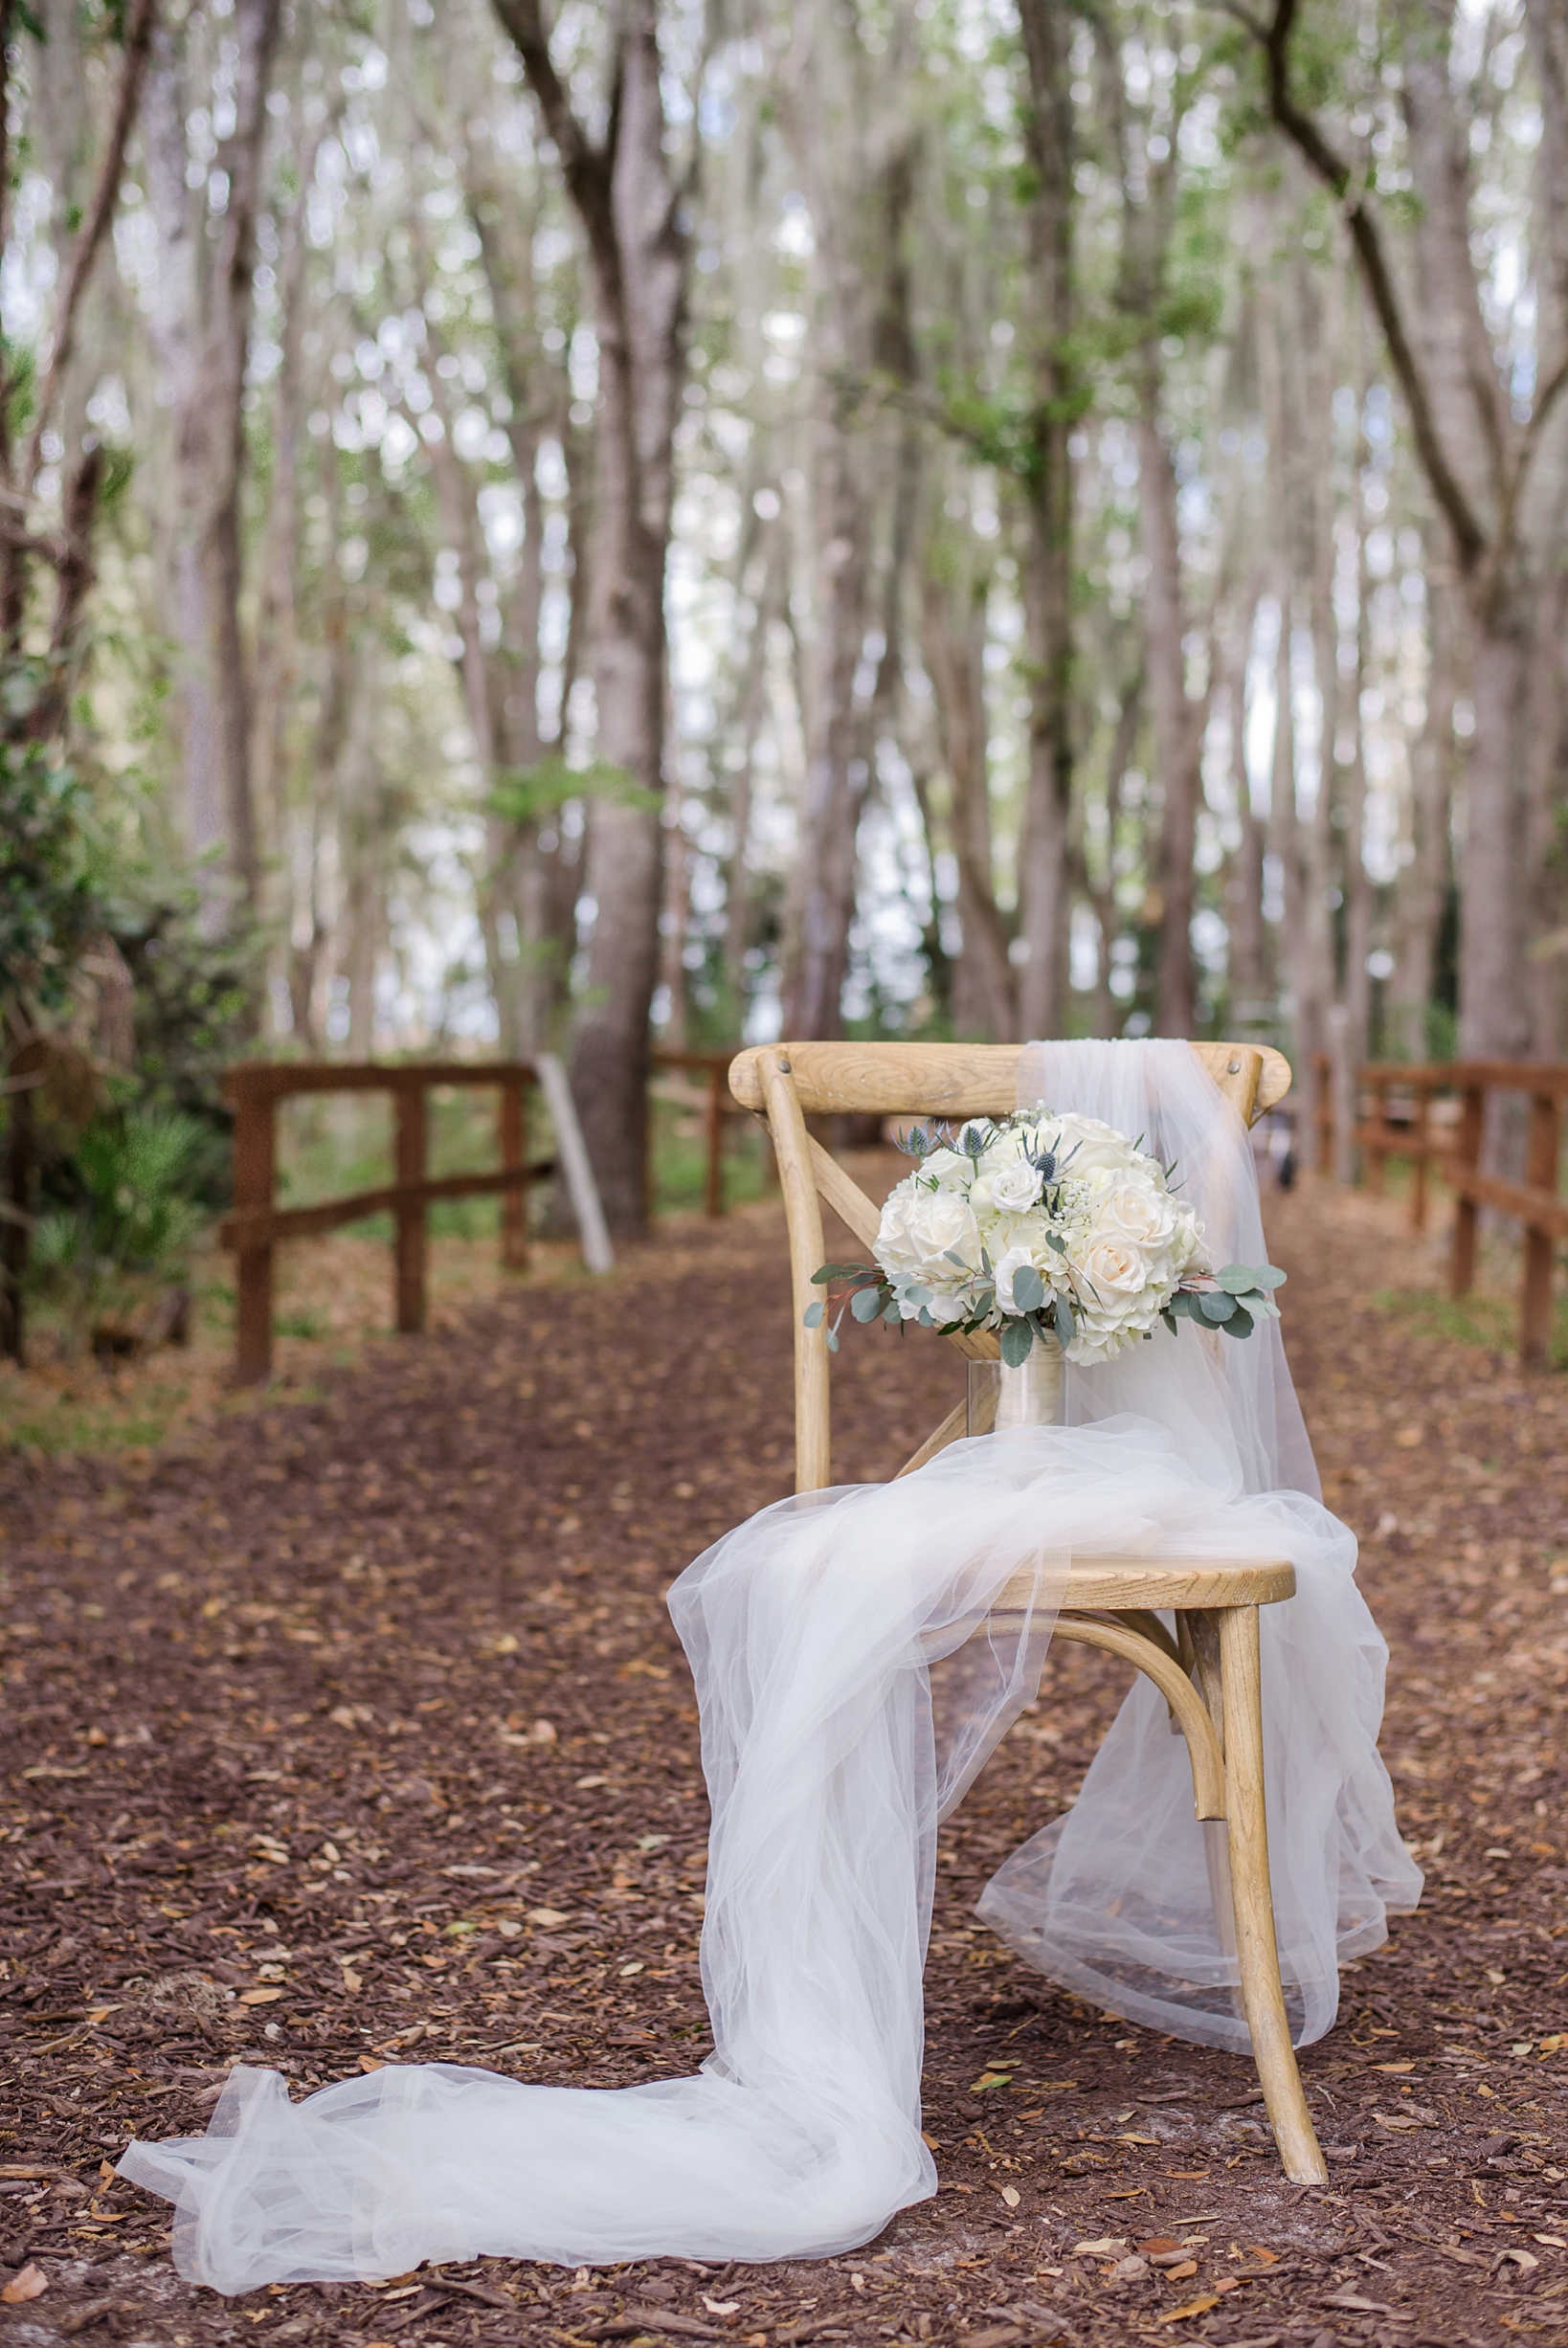 Bride's wedding bouquet in a rustic forest setting surrounded by her veil